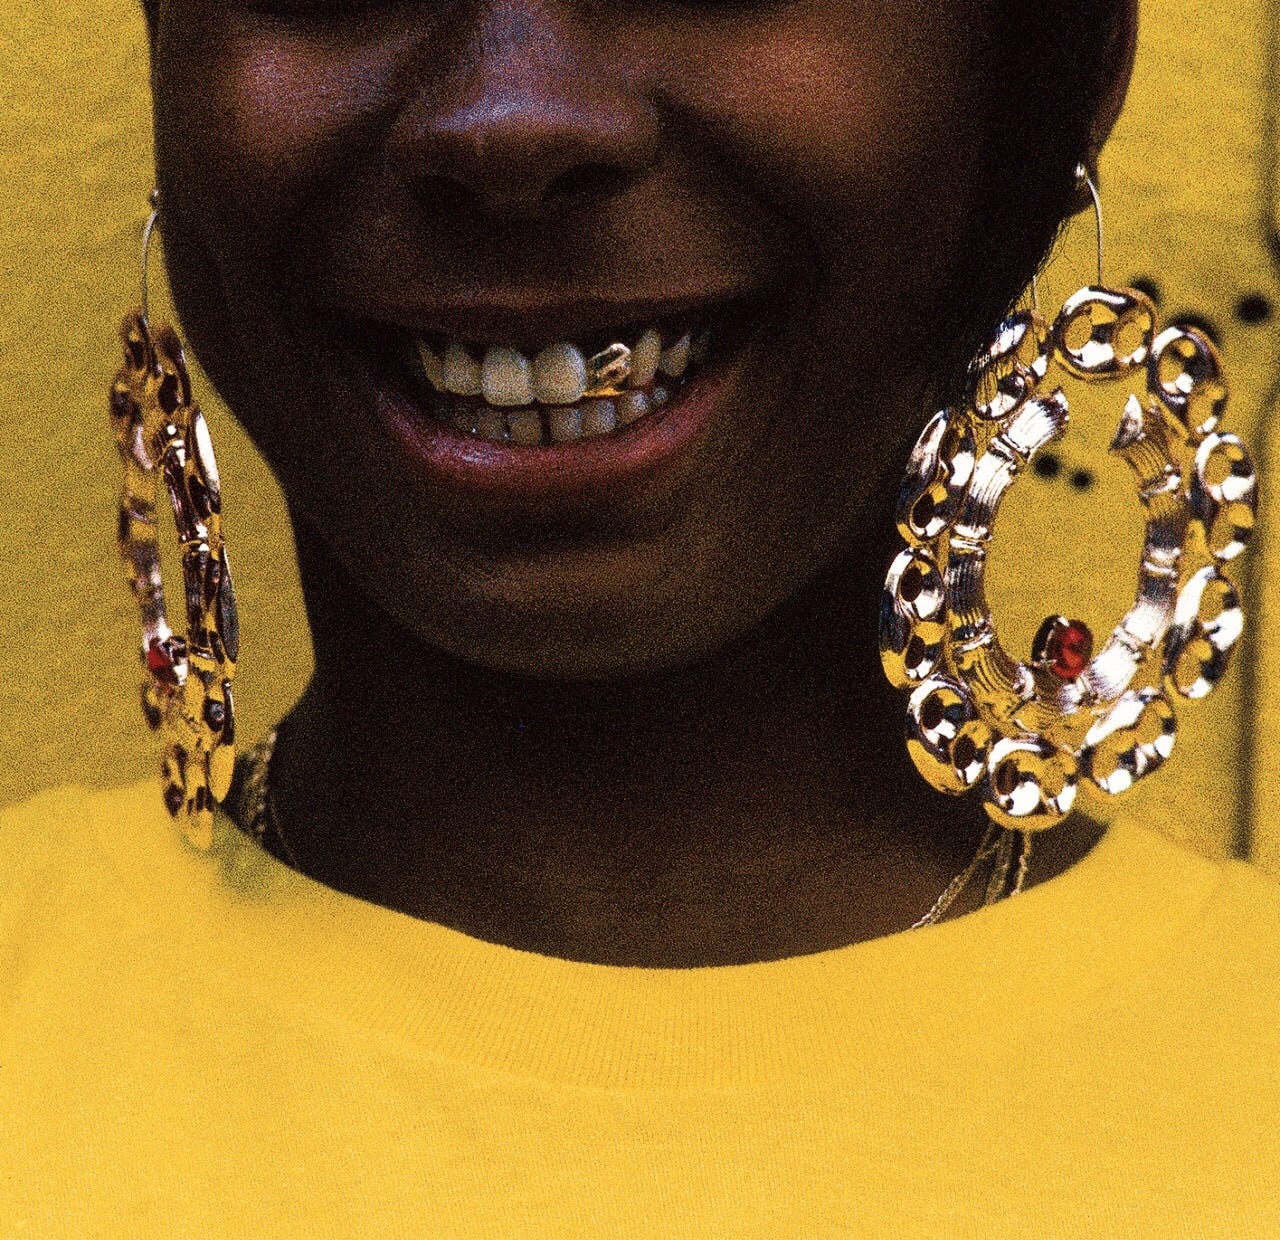 Black Girls From The Hood Are The Real Trendsetters | by Wanna Thompson |  Medium